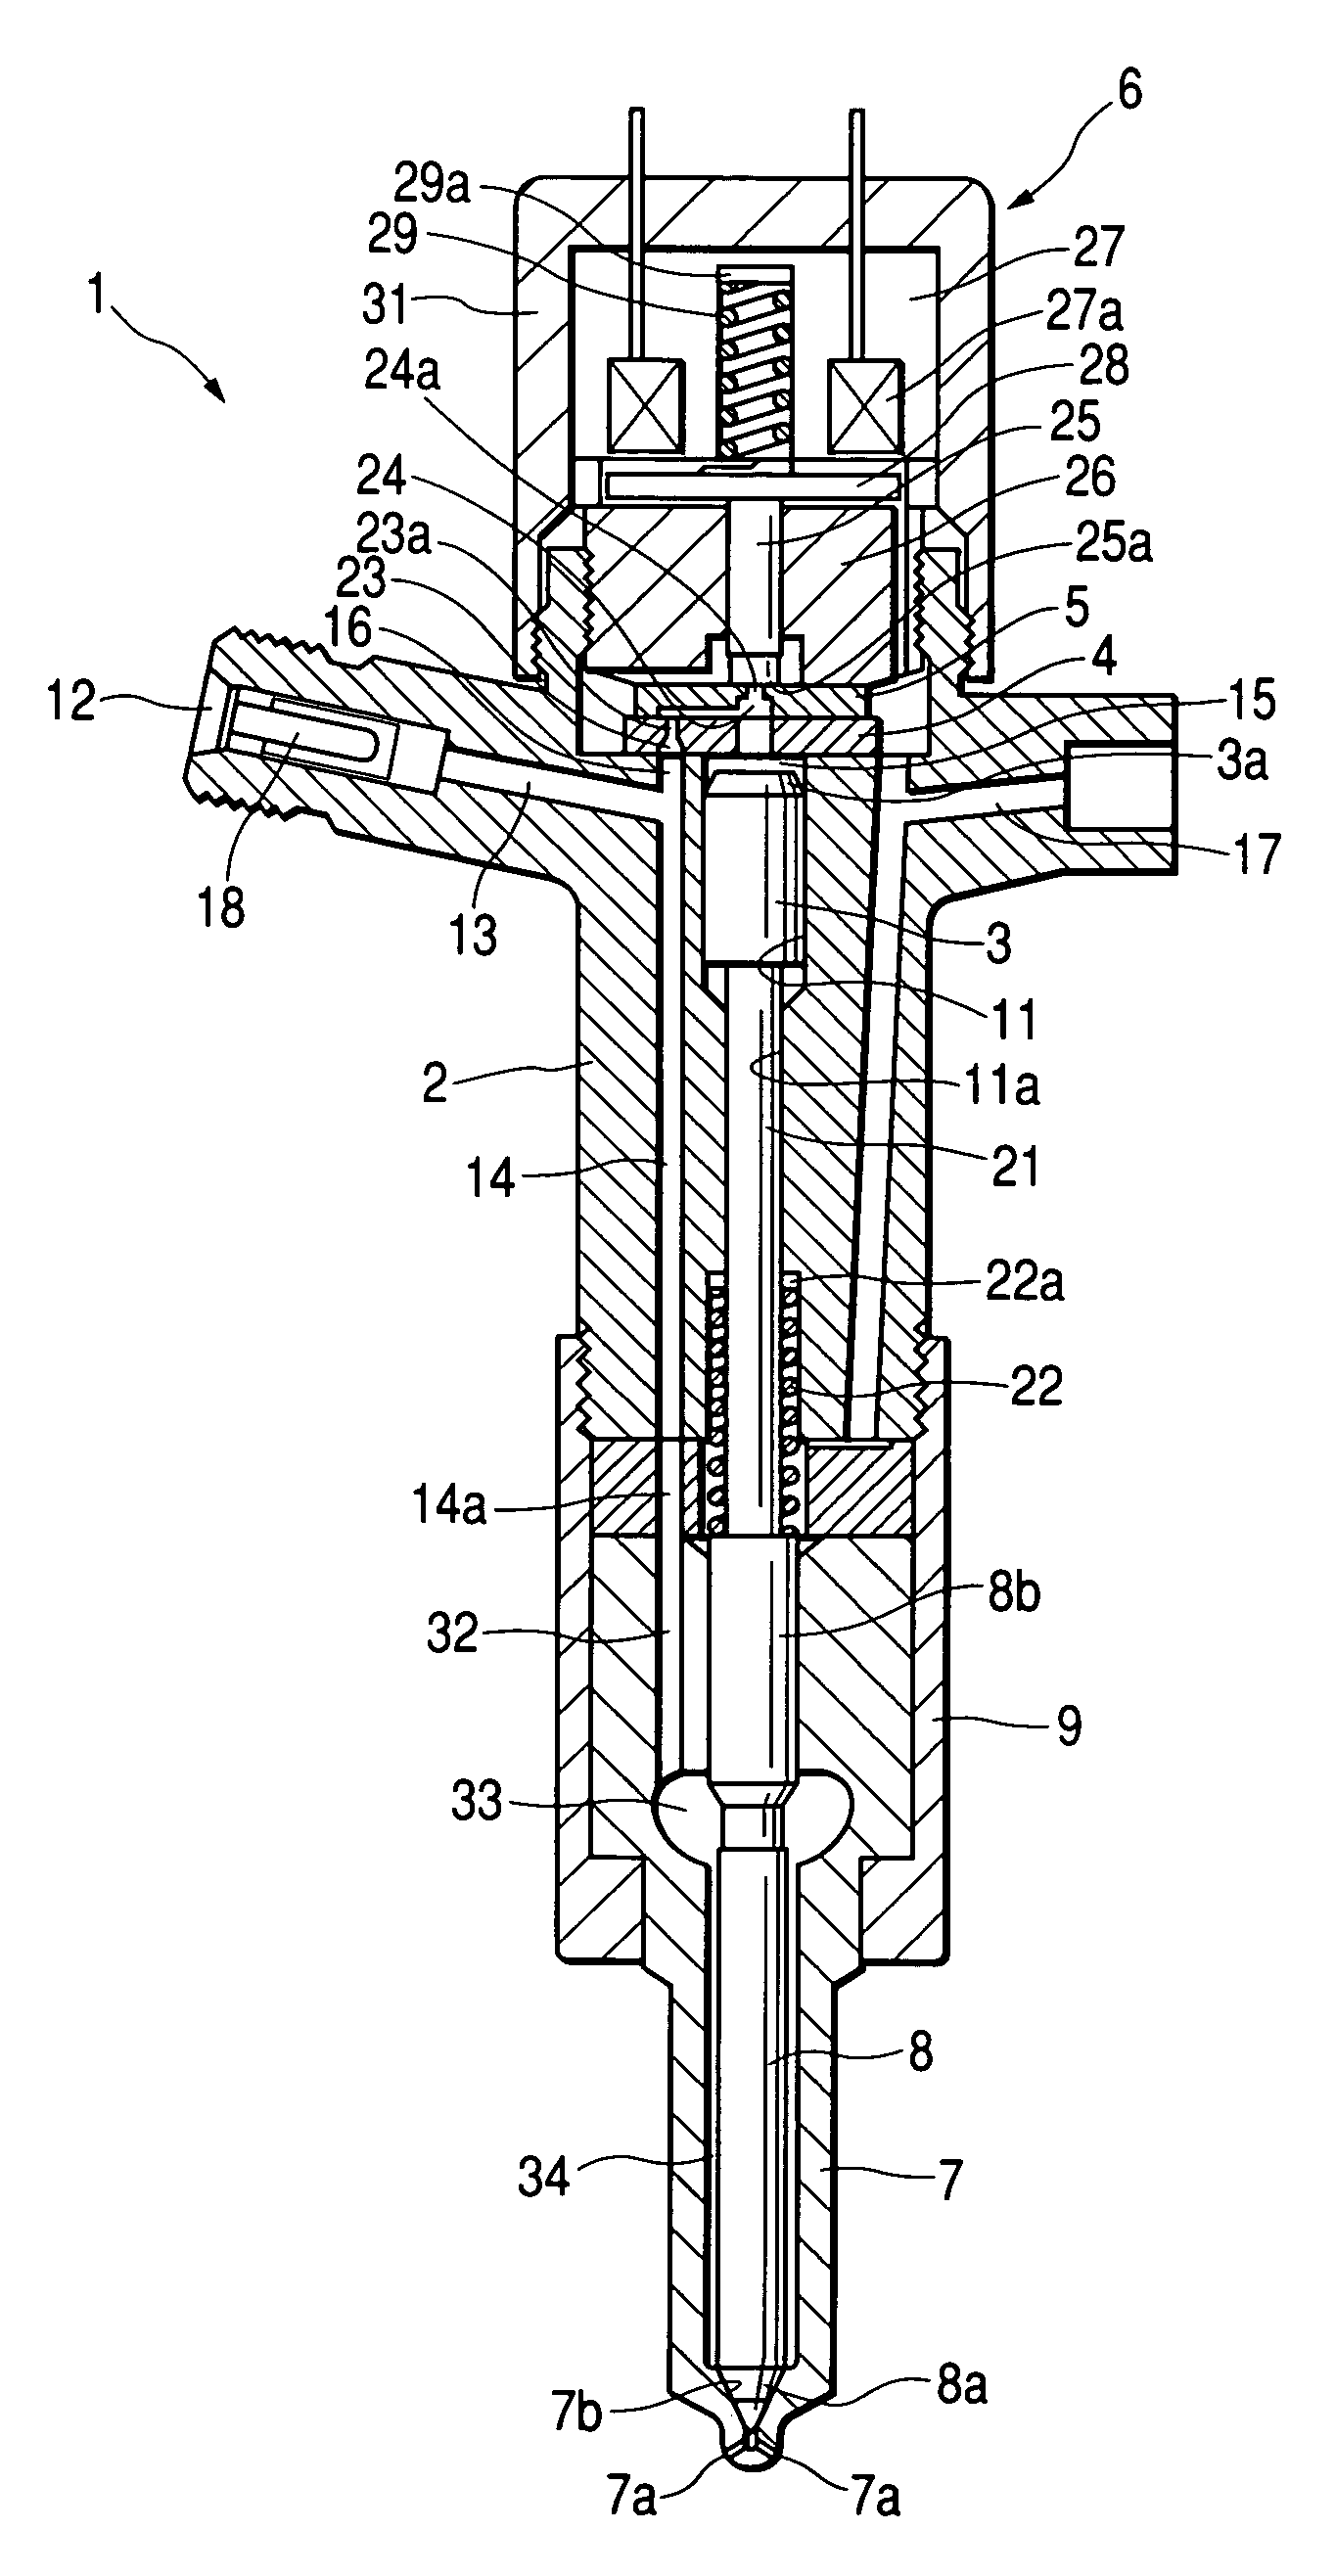 Constituent parts assembling method for an actuating apparatus